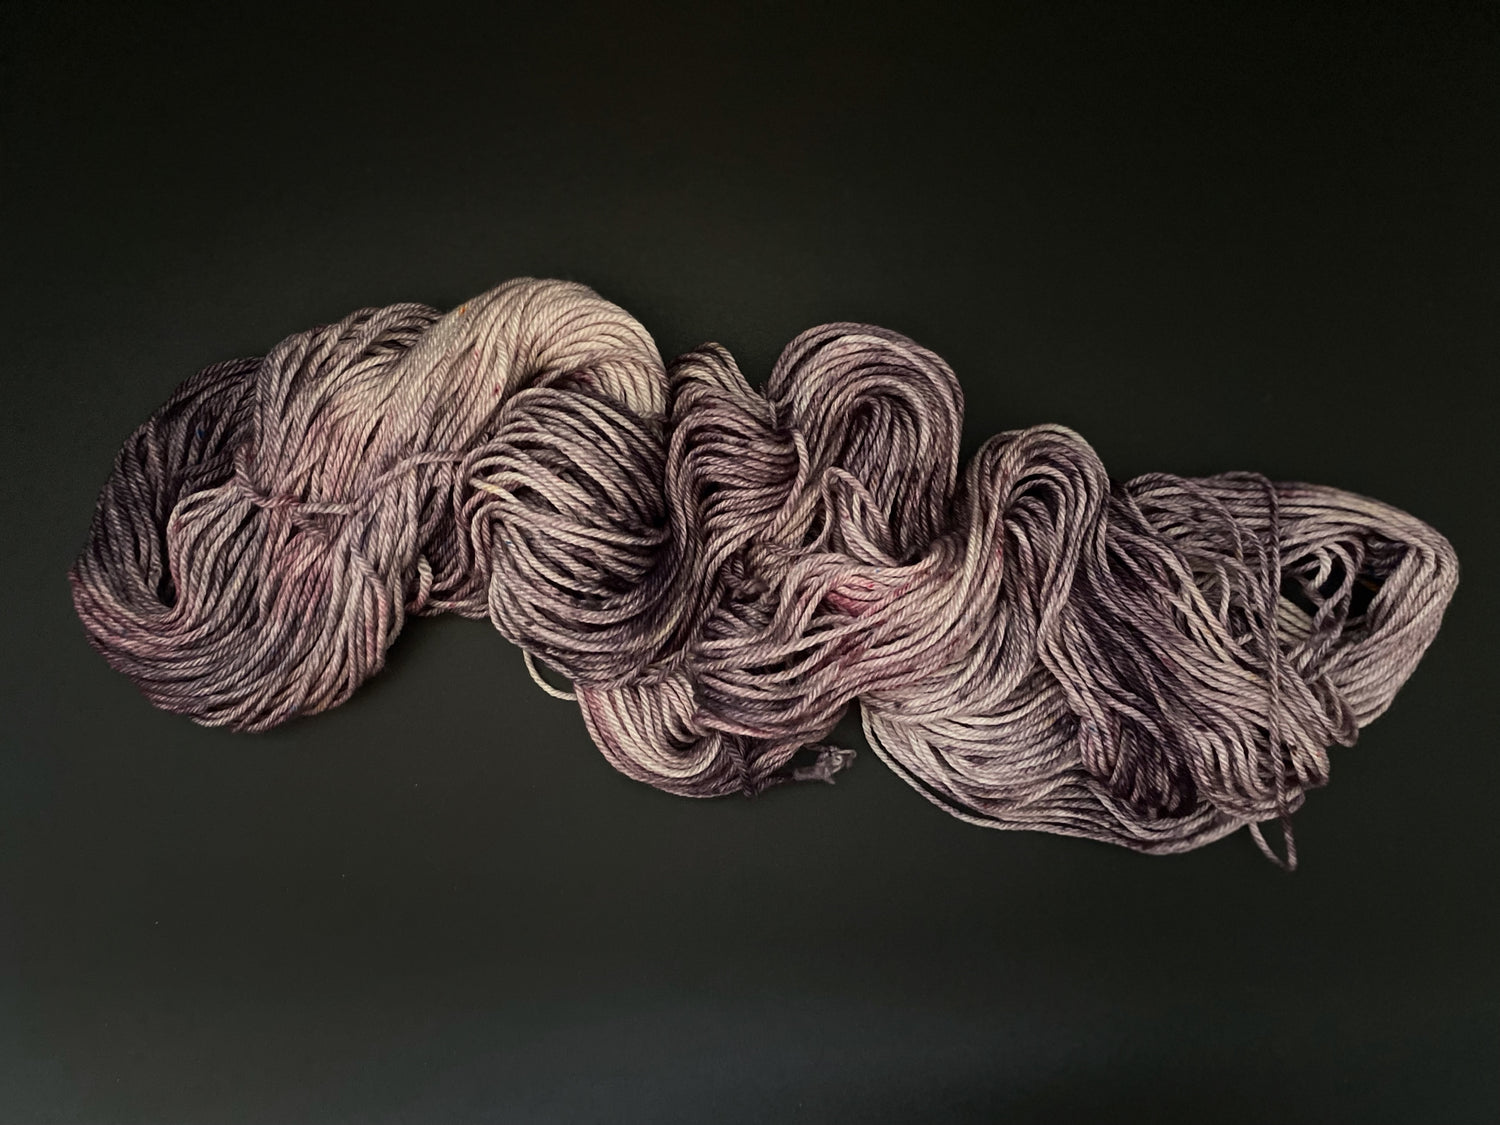 A single skein of hand dyed yarn, with various purple and mauve tones, draped on a black background.